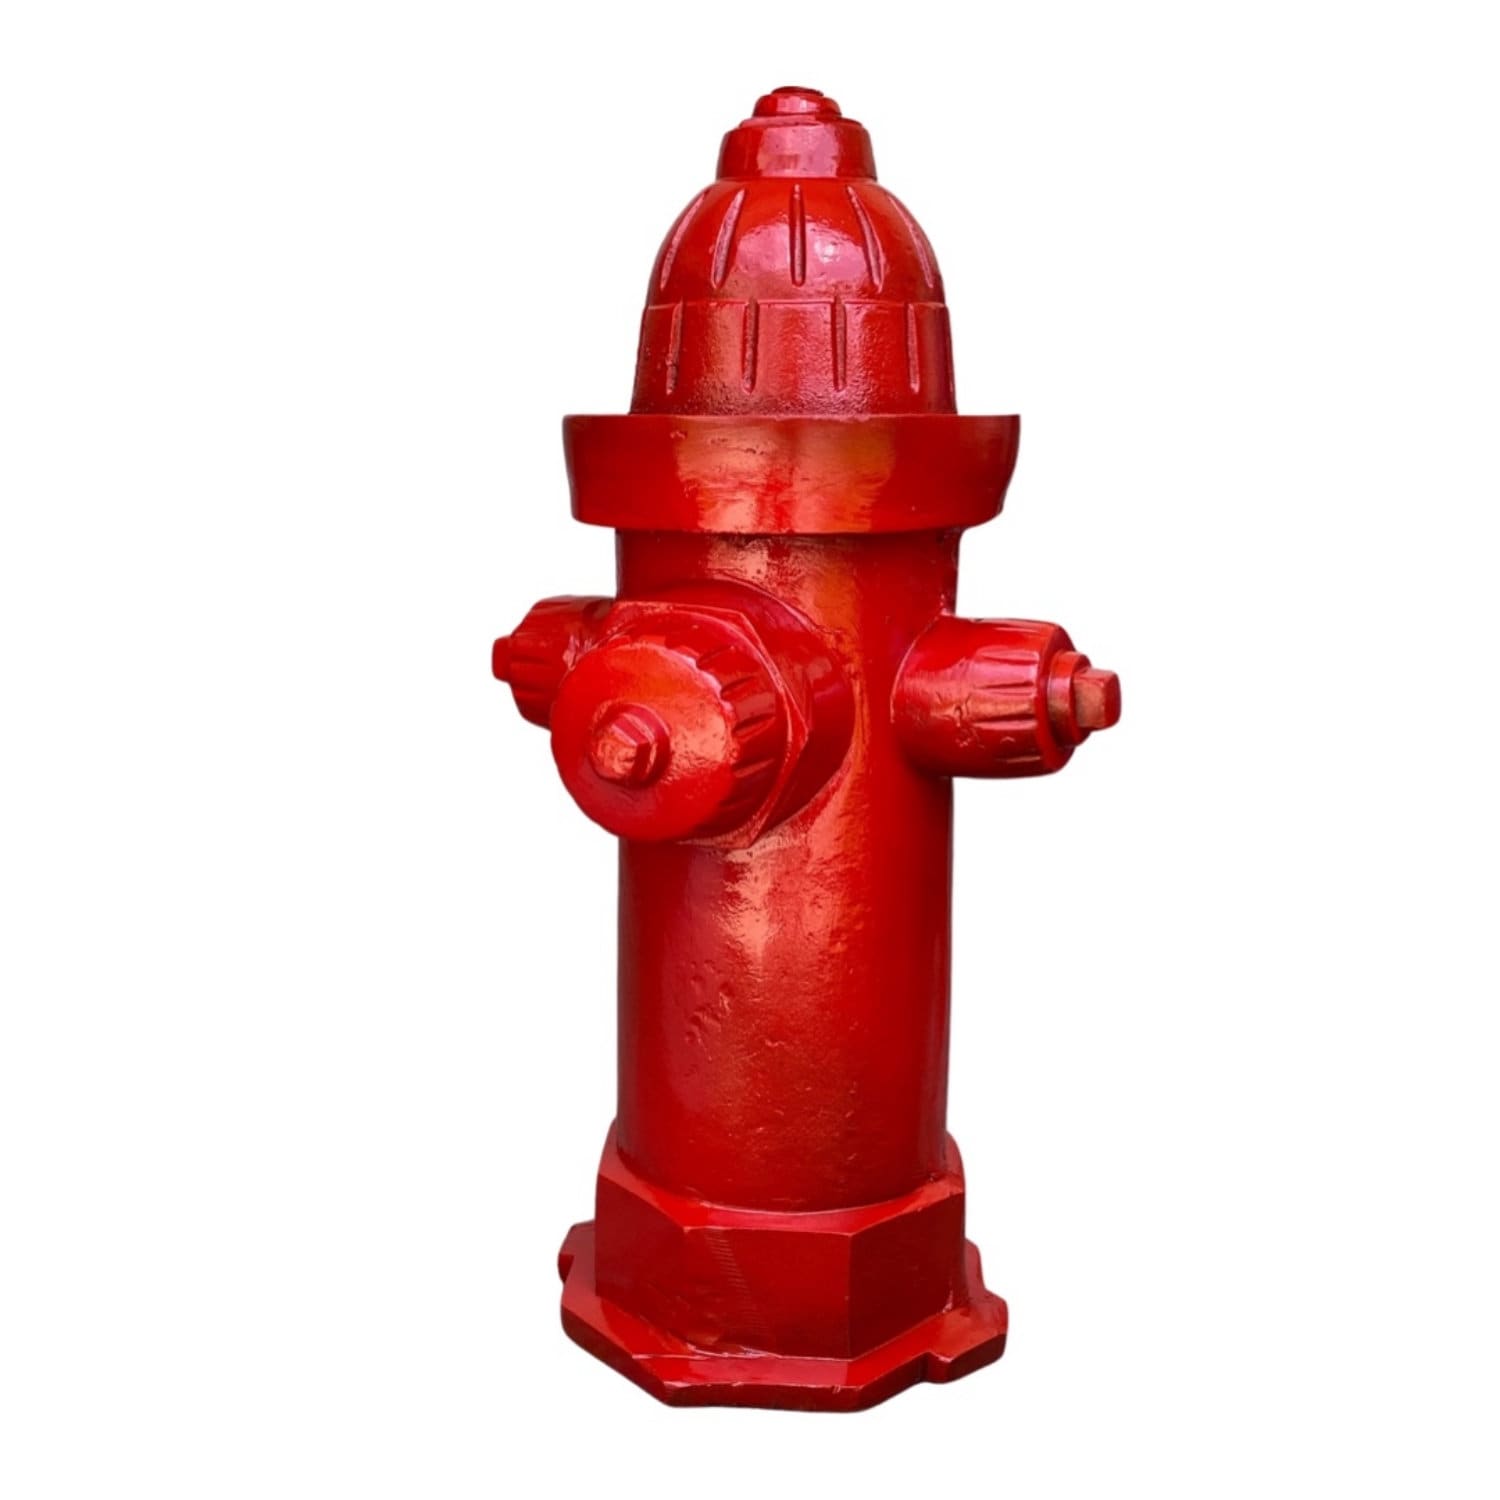 Fire Hydrant Red Enamel Bracelet Beads And Charms Pendant For DIY